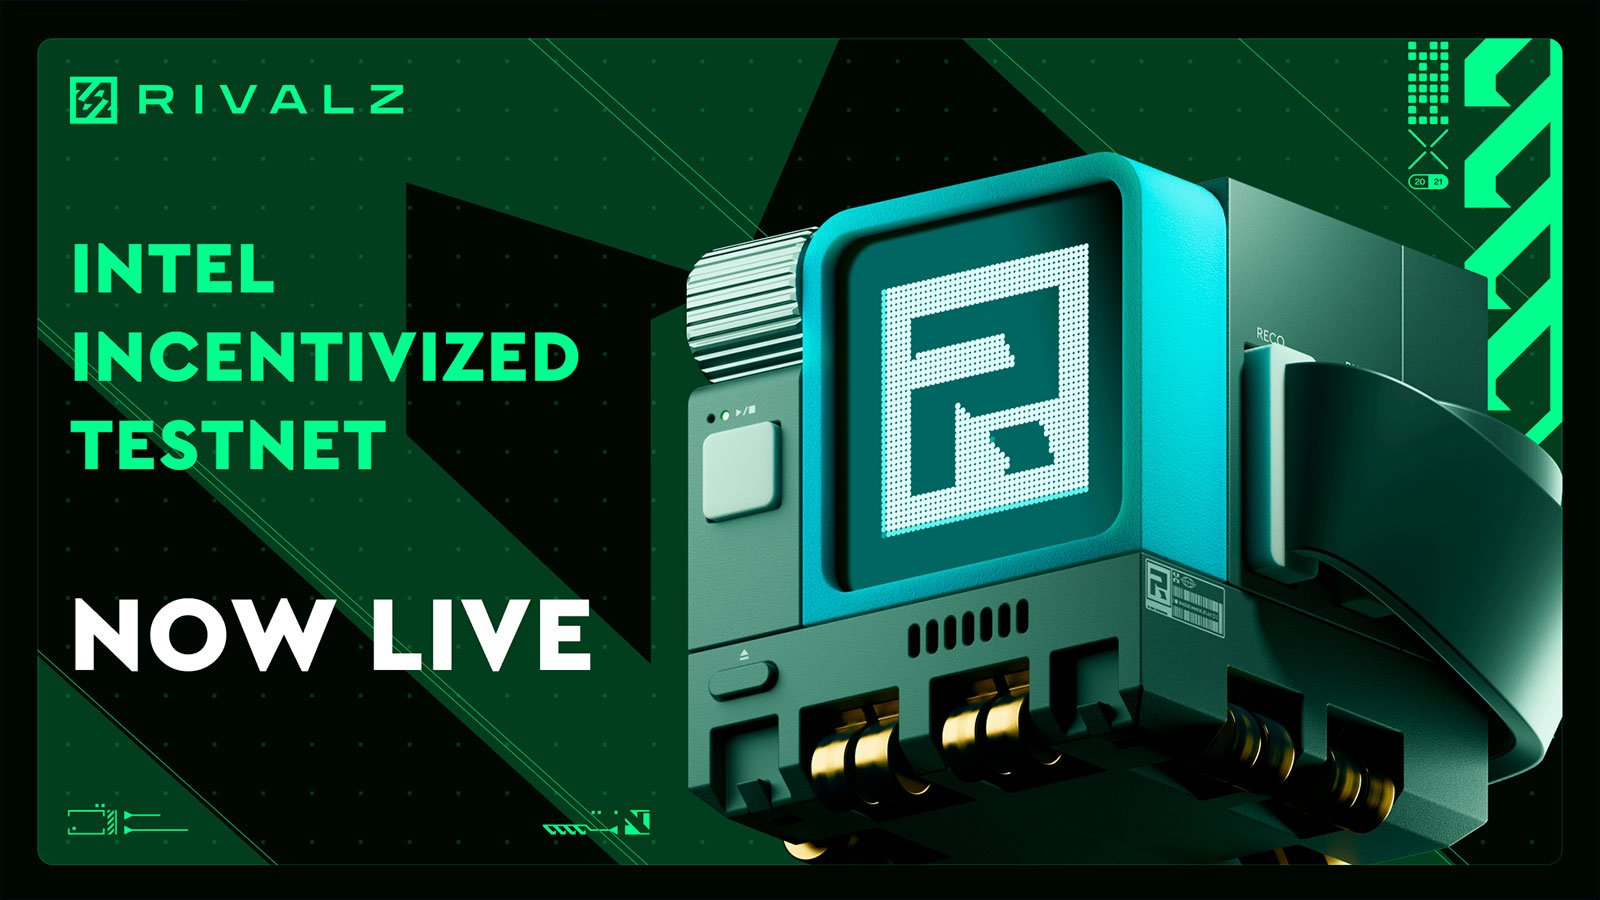 Rivalz Network Launches Its Intel Incentivized Testnet